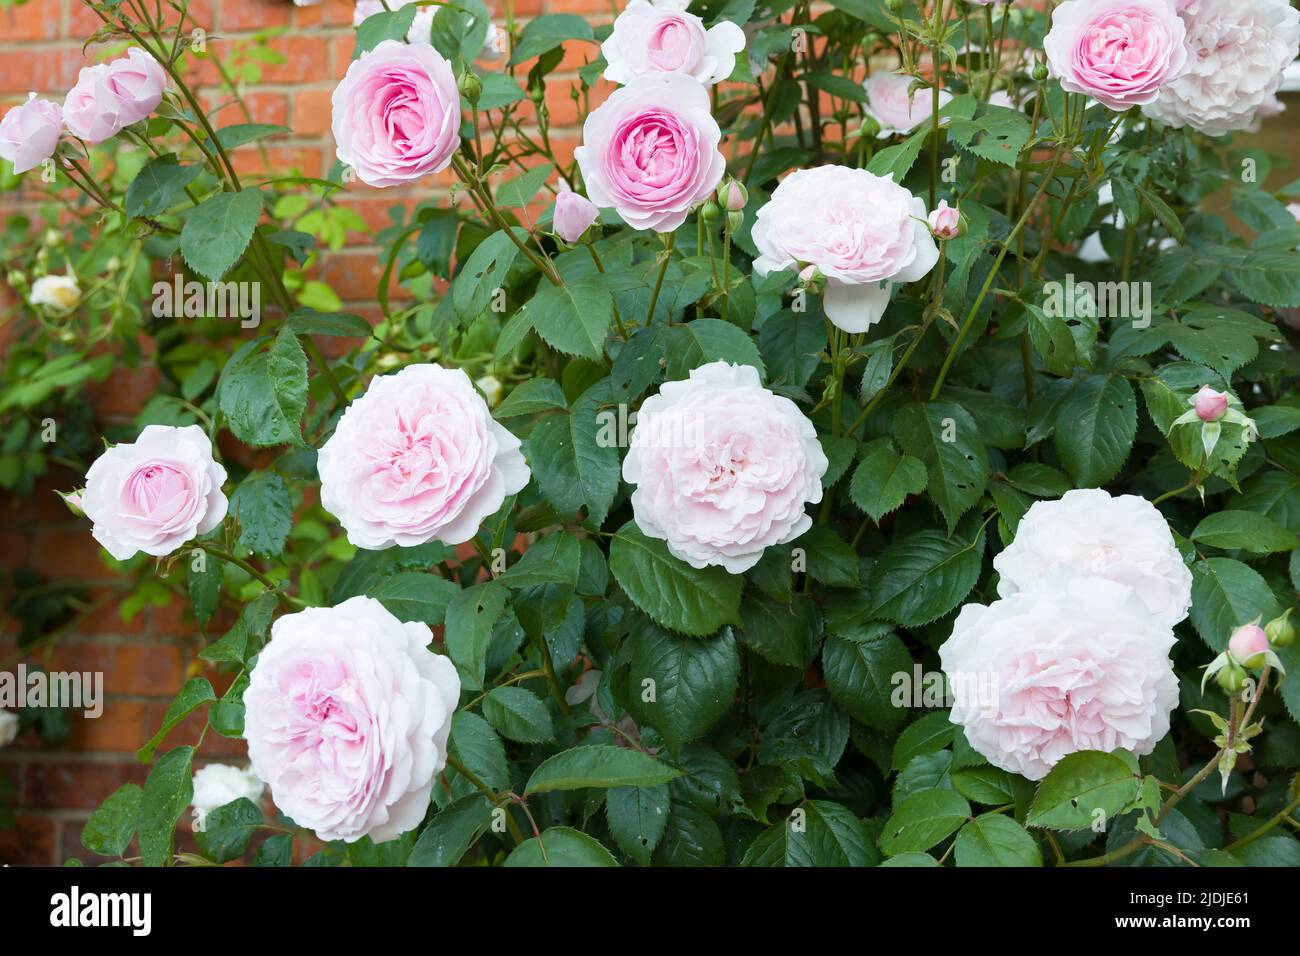 Roses in a UK garden, rose bush with pink flowers Stock Photo